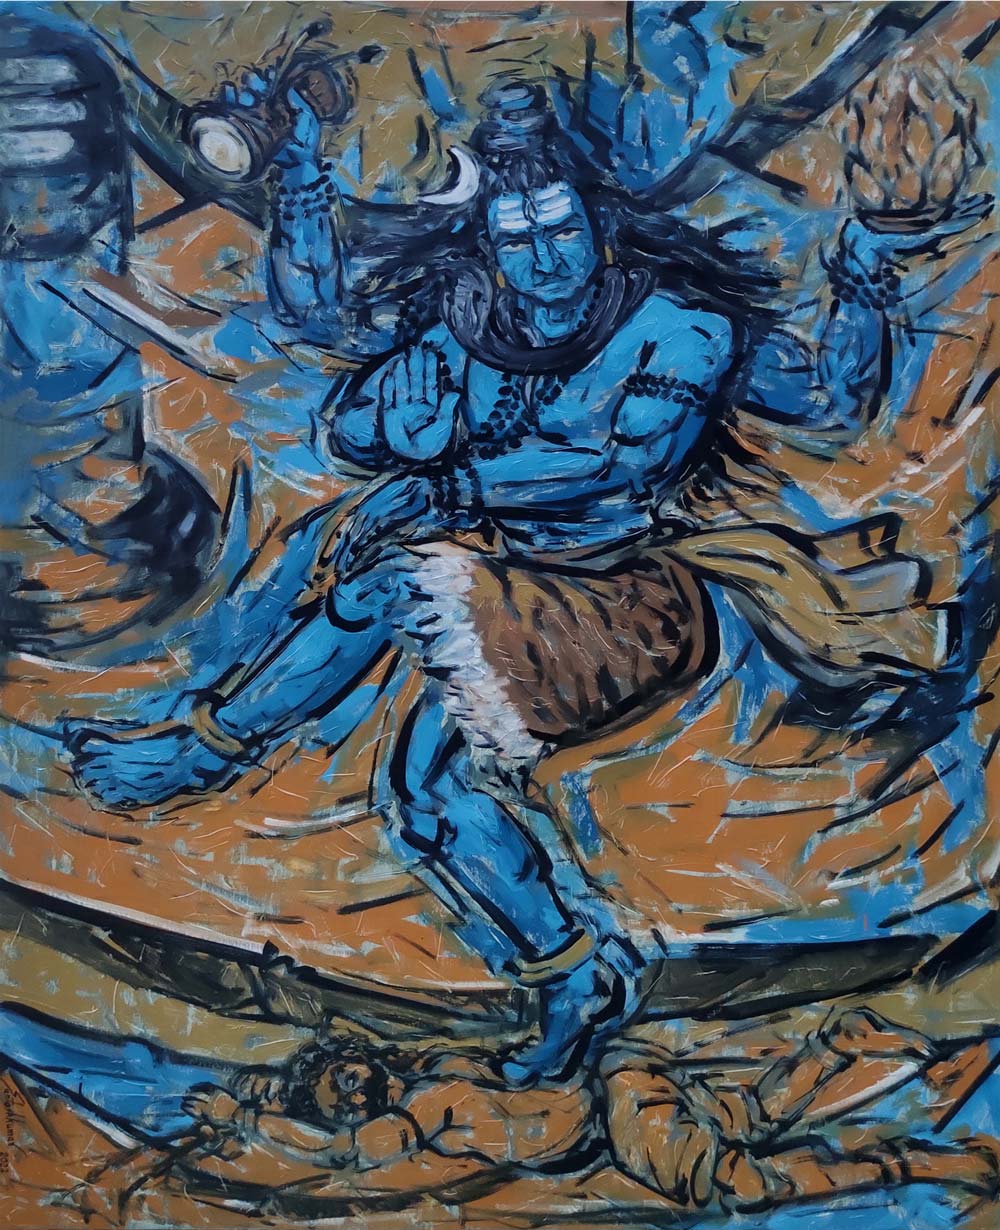 Figurative Painting with Oil on Canvas "Shiva-205" art by Santoshkumar Patil